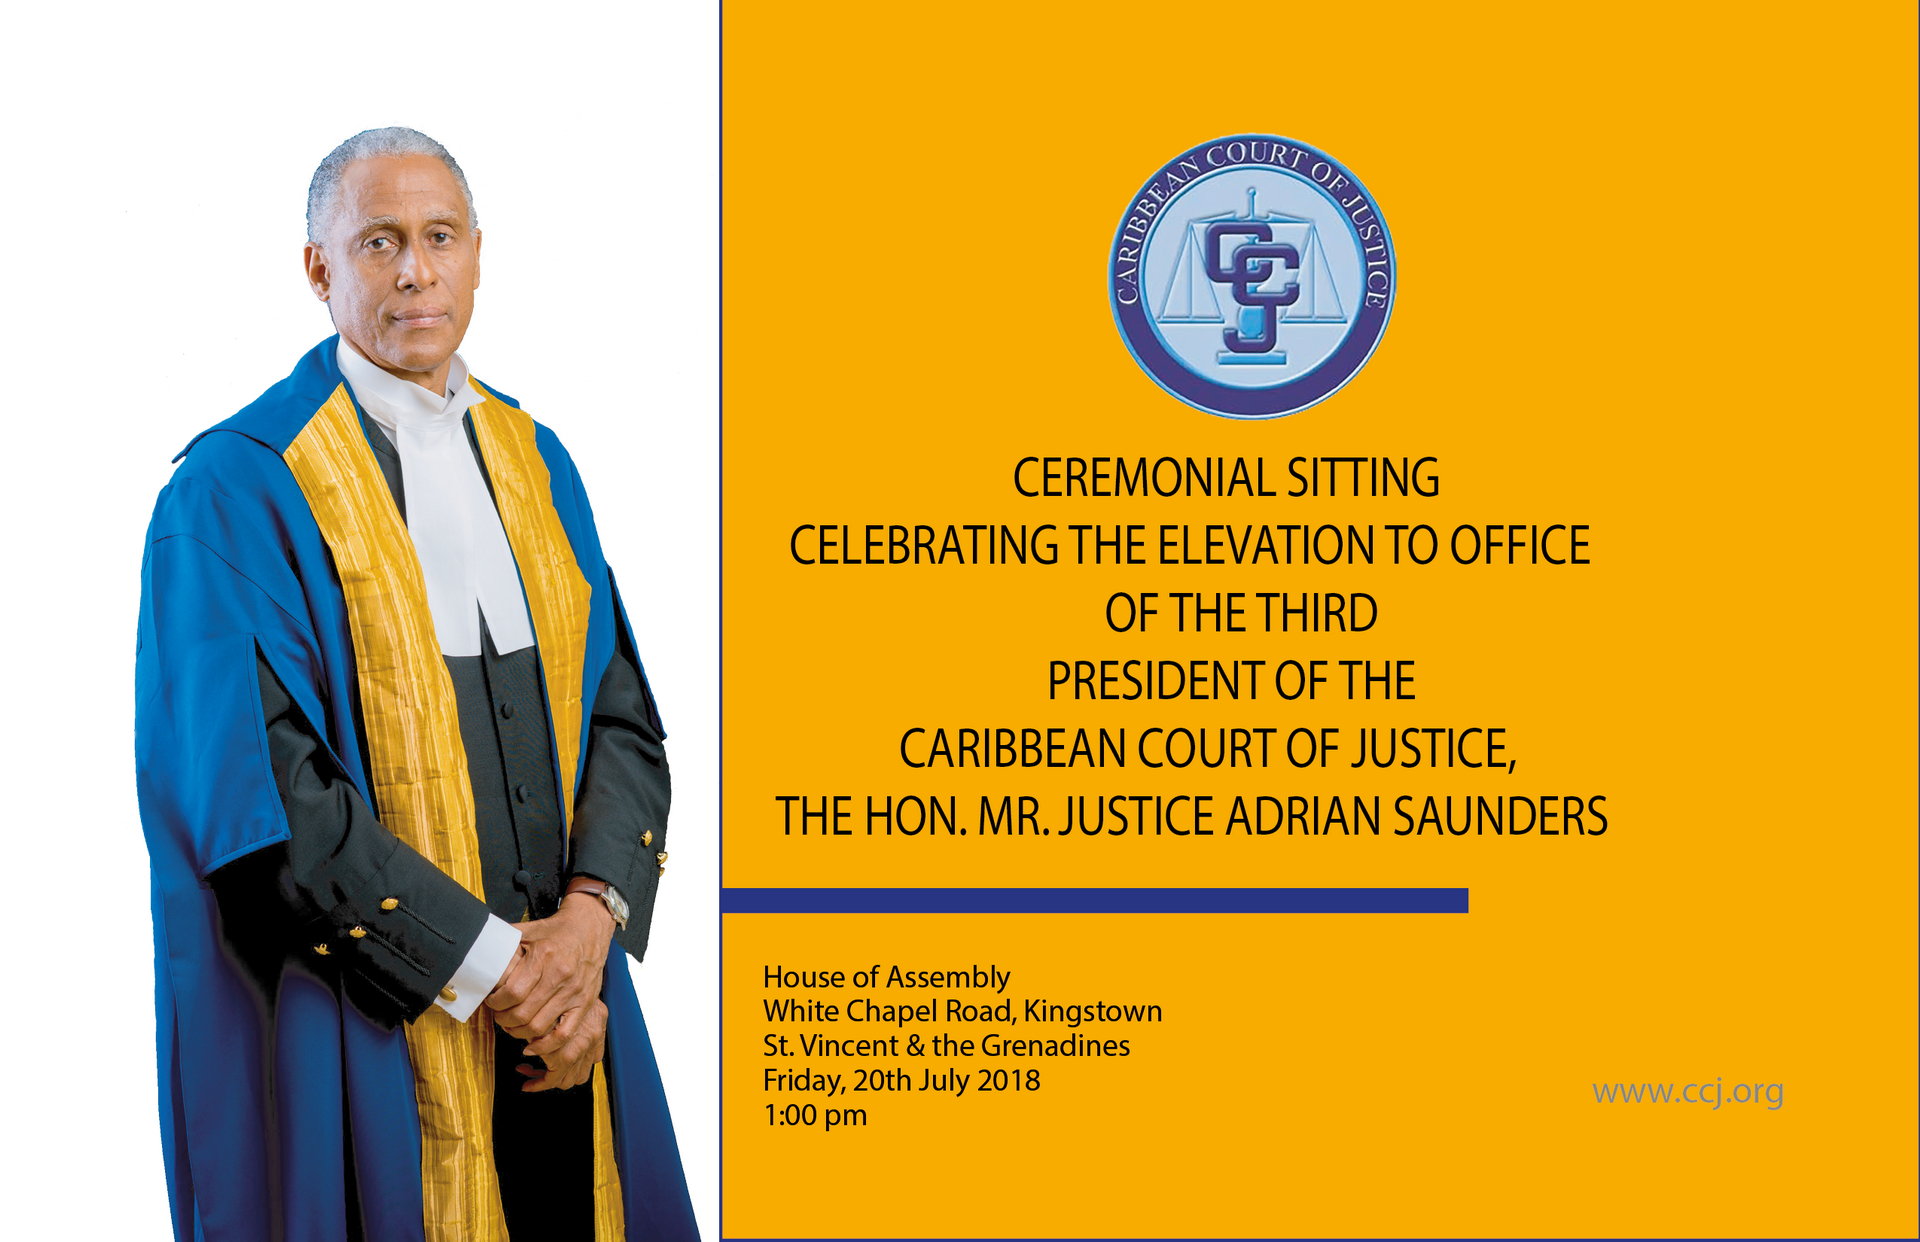 Ceremonial Sitting for the Elevation of Office of the Third President of the CCJ